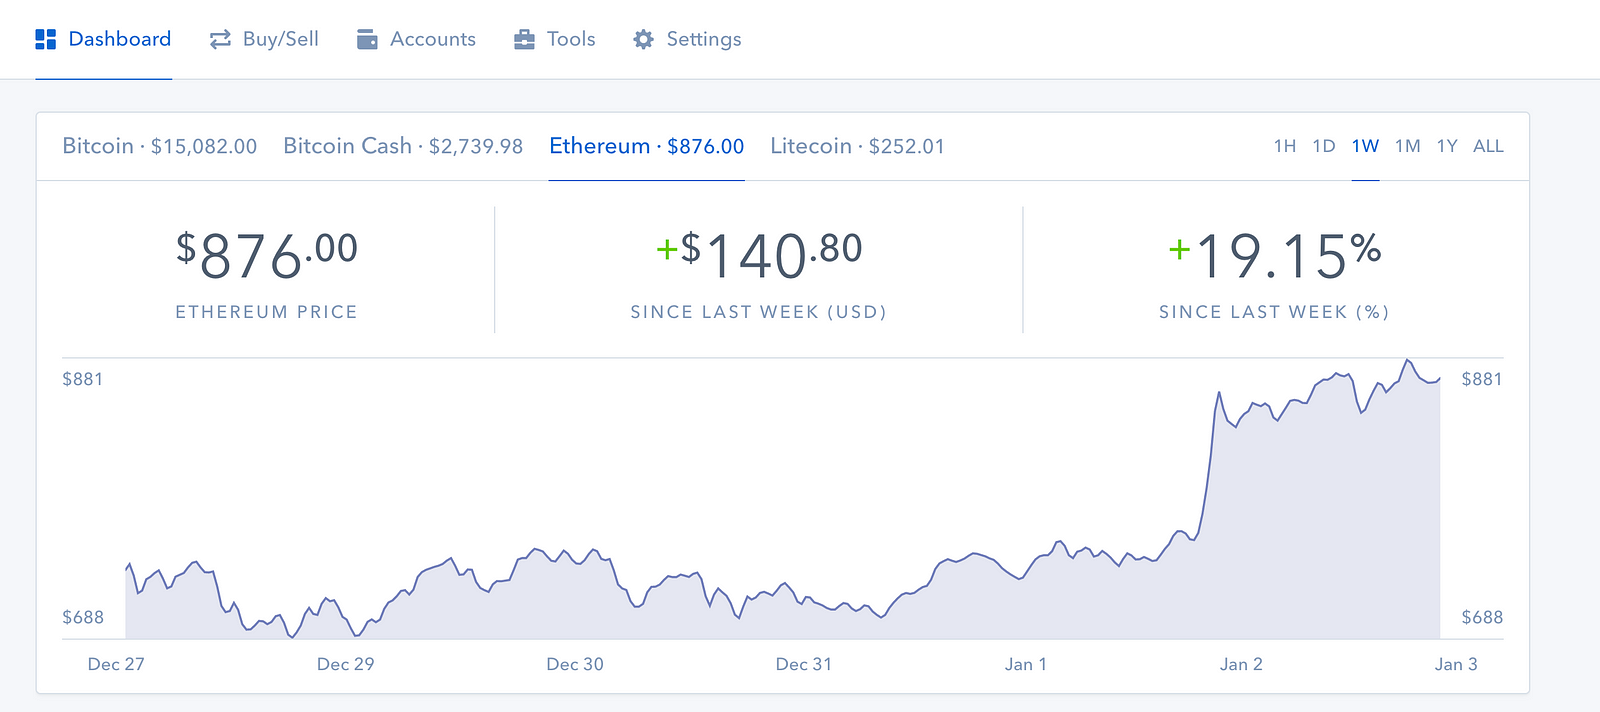 how long does coinbase take to buy bitcoin